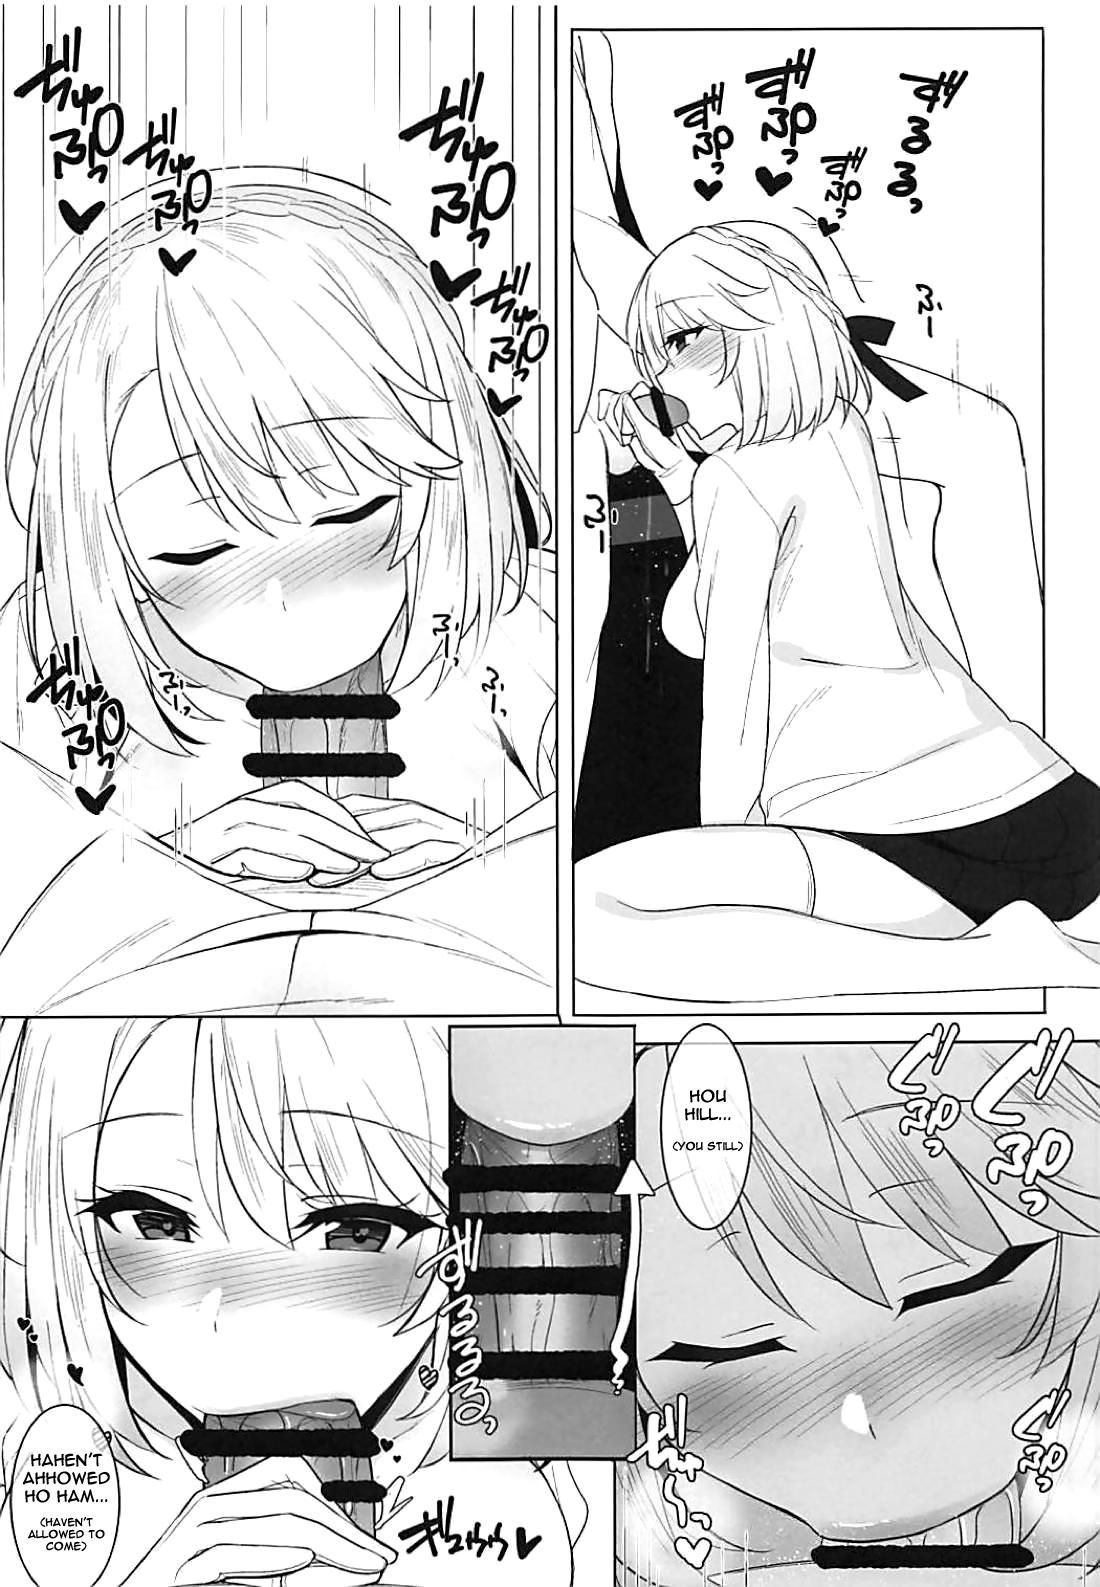 Sexy Sluts Wales to! | With Wales! - Azur lane Panties - Page 9